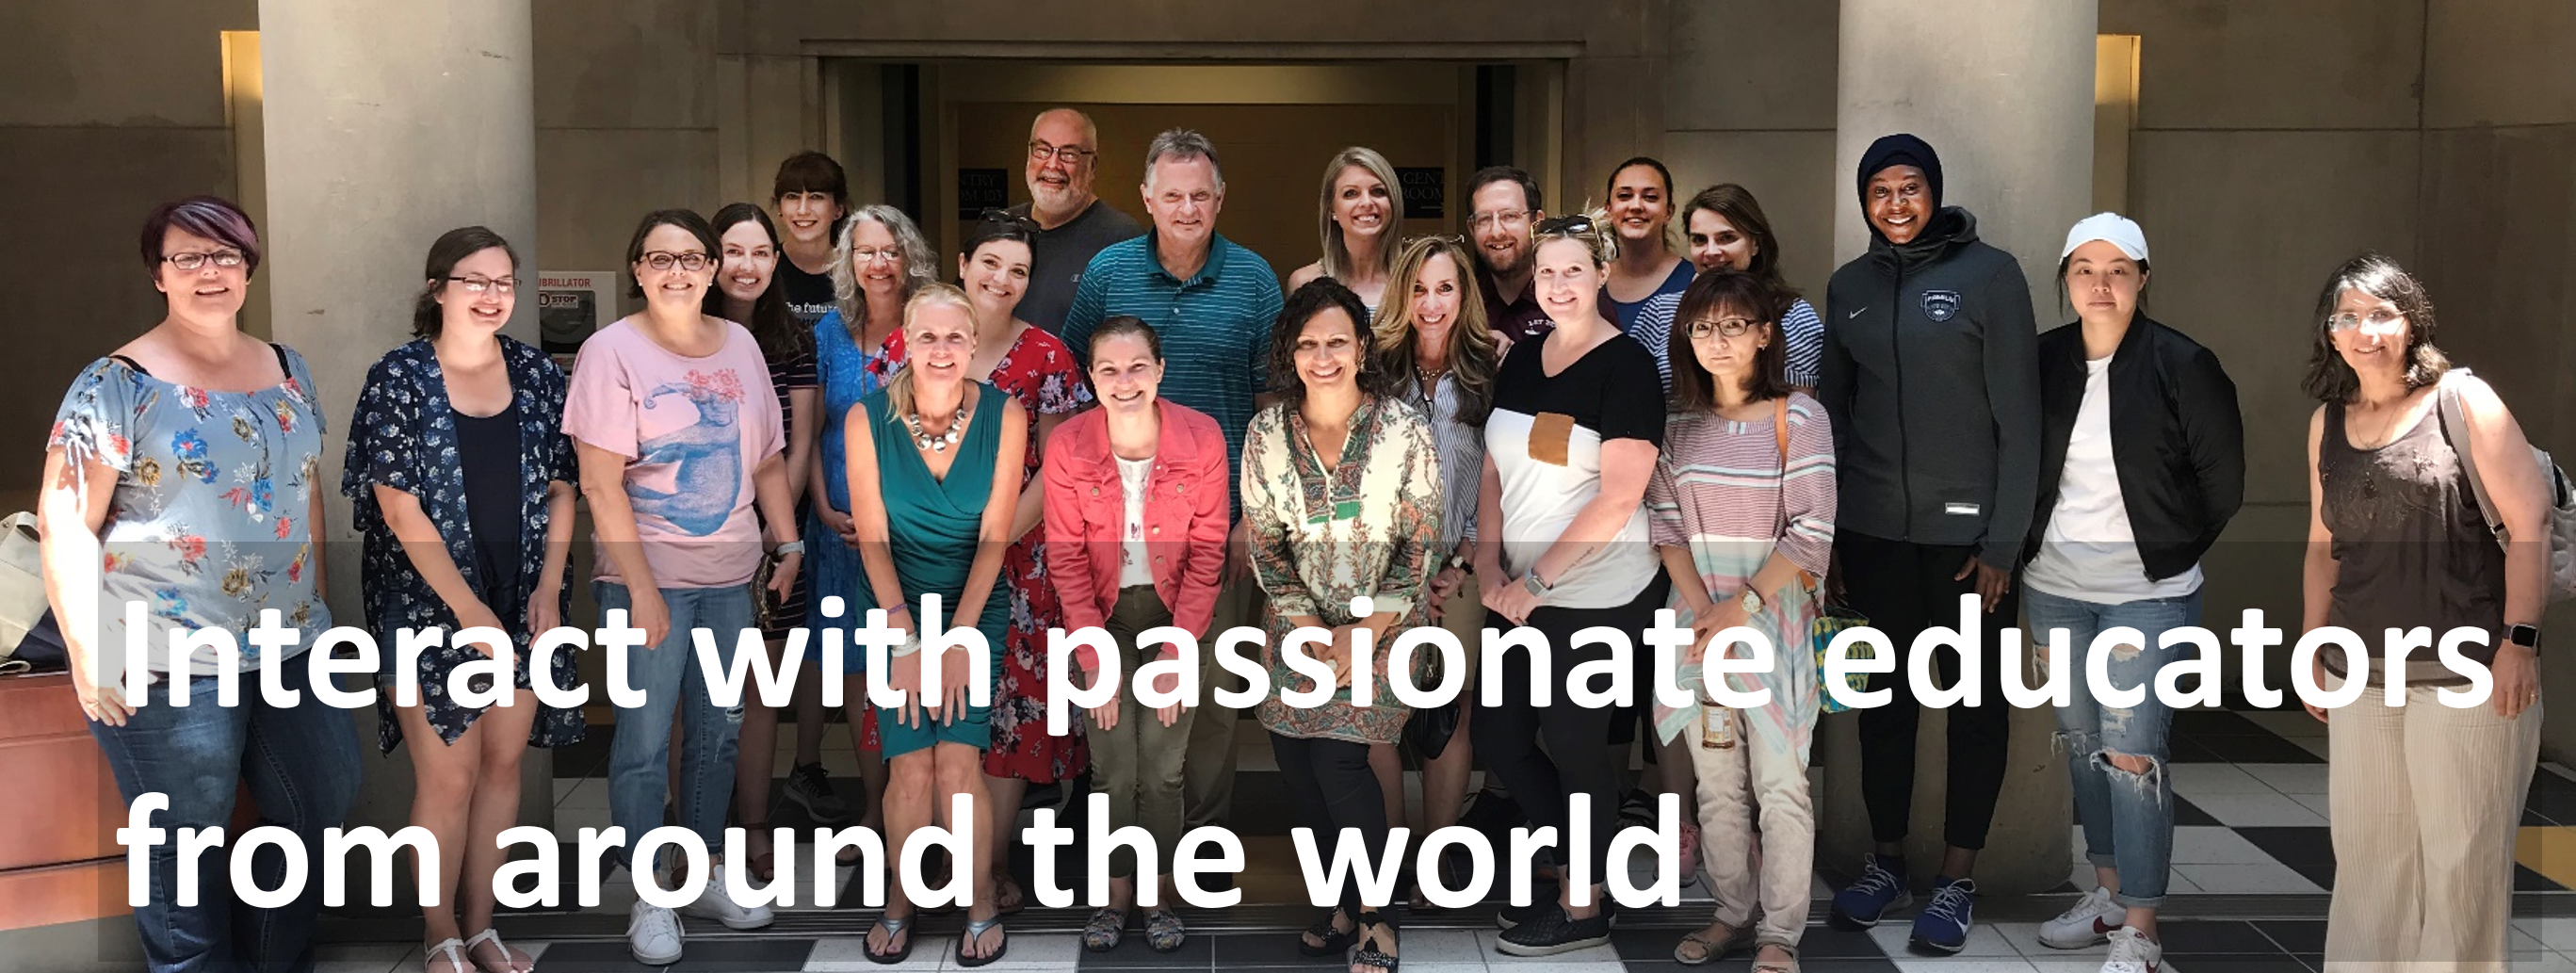 Photo of a group of students with the caption, "Interact with passionate educators from around the world."